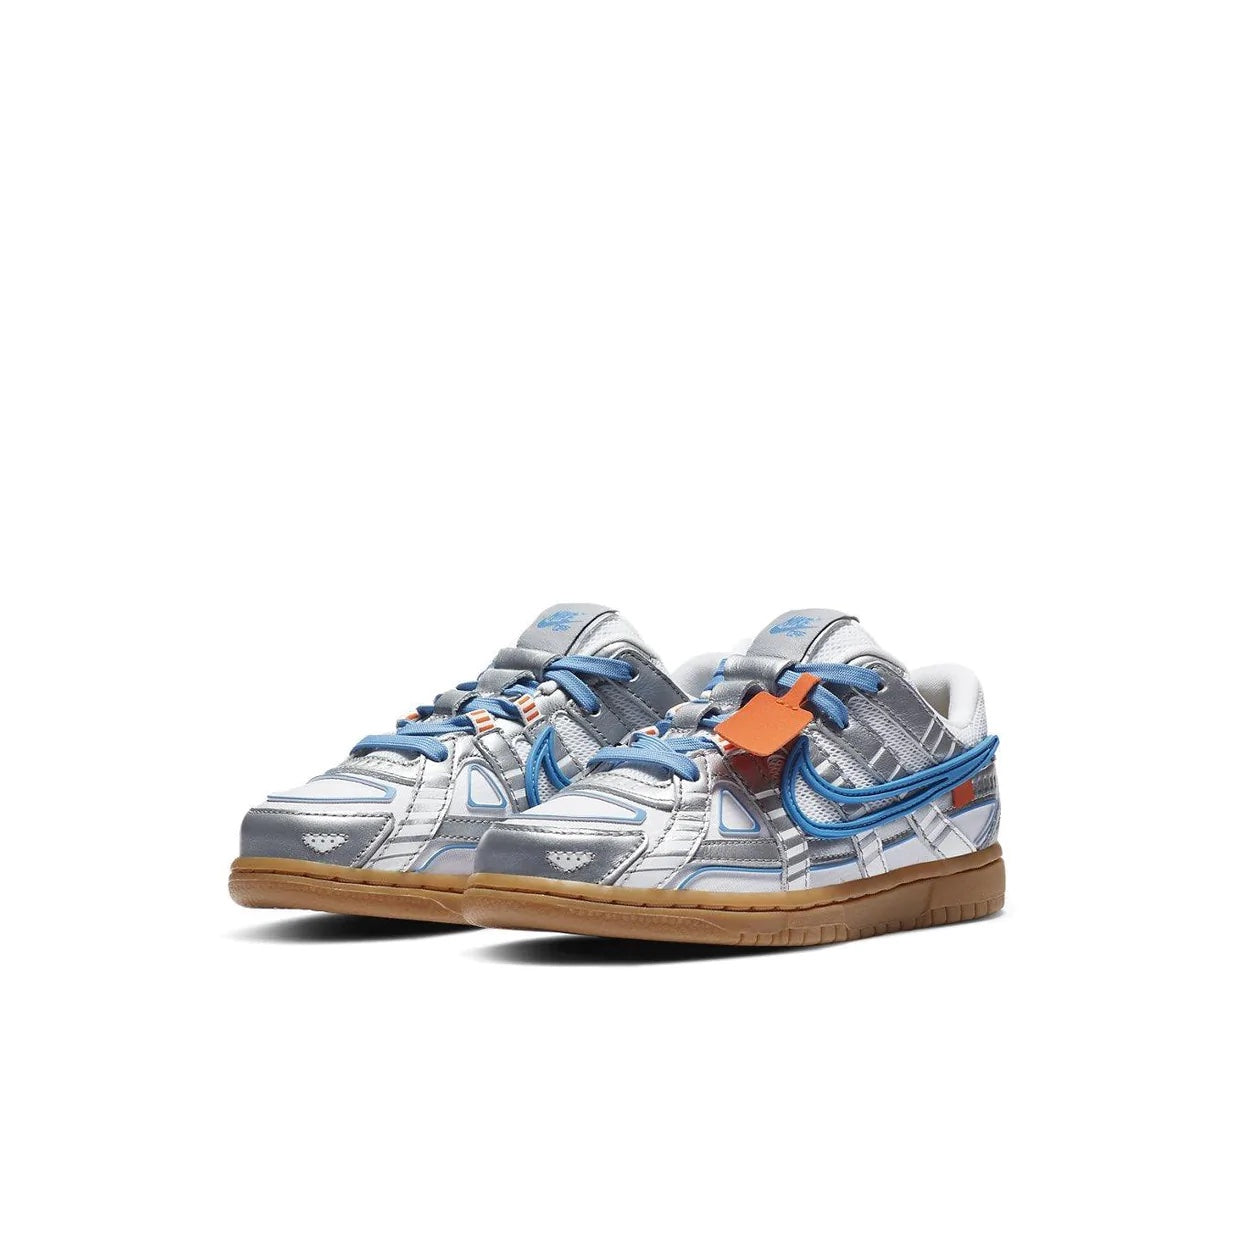 Nike Air Rubber Dunk x Off-White Kids 'University Blue' front view